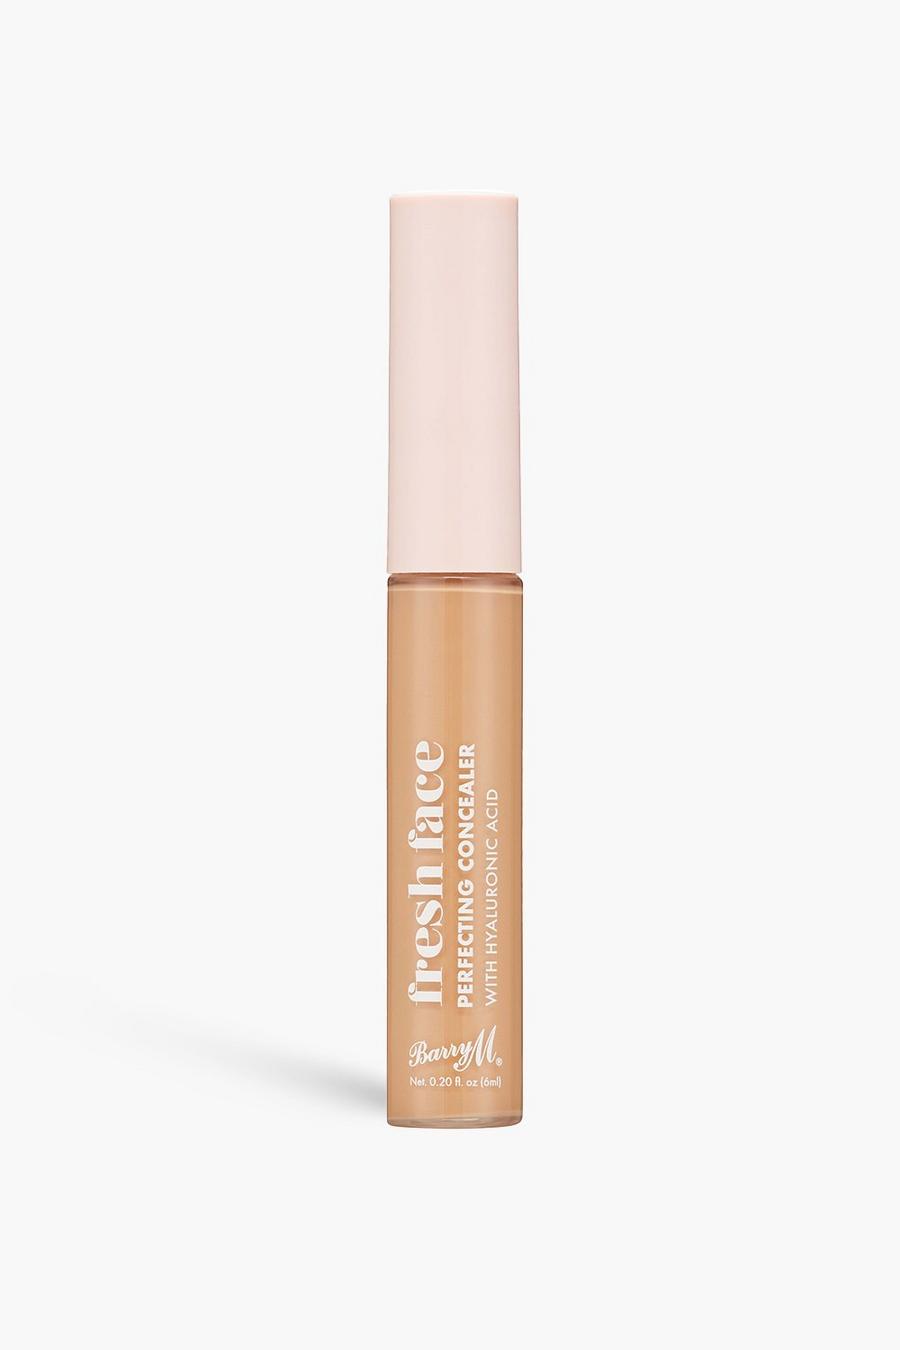 Tan brun Barry M Fresh Face Perfecting Concealer 6